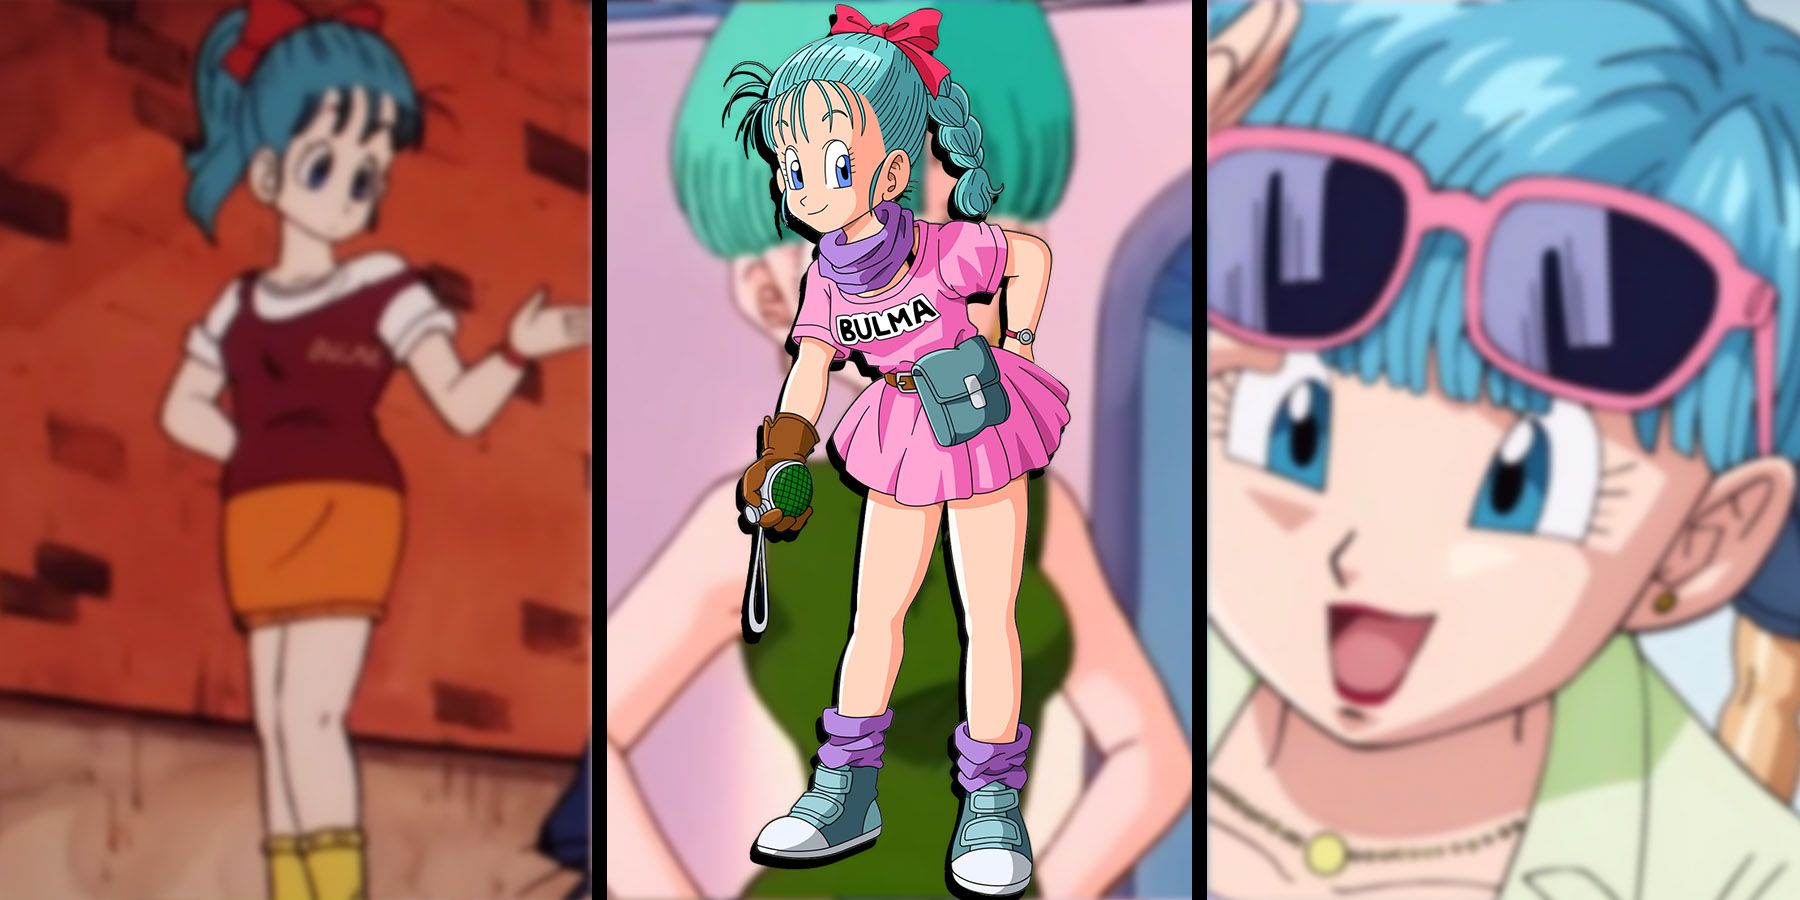 alex wiessner recommends pictures of bulma from dragon ball z pic